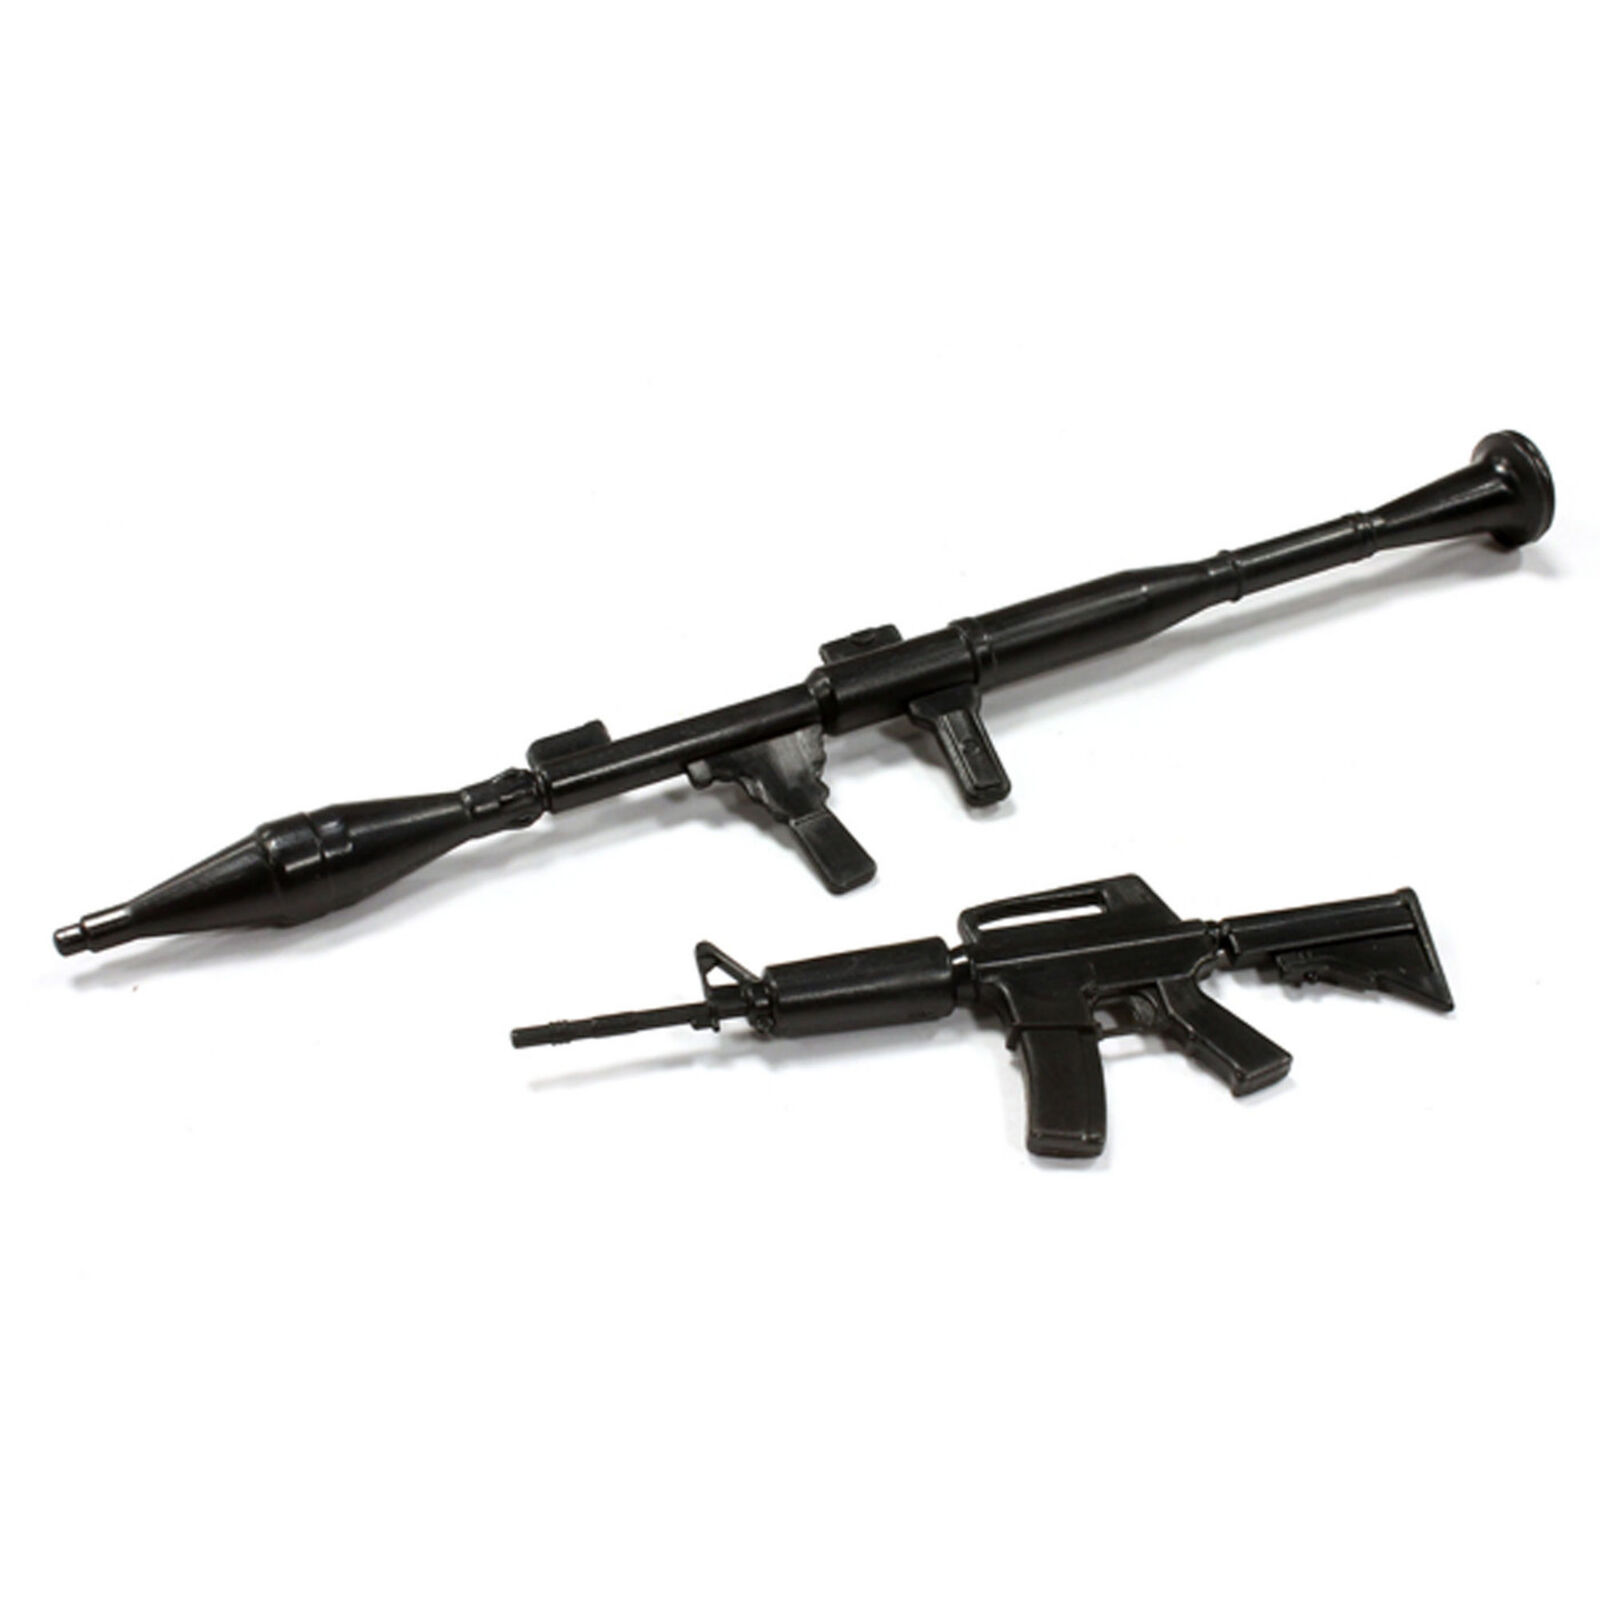 Realistic Scale Rifle and Rocket Launcher Set: 1/10